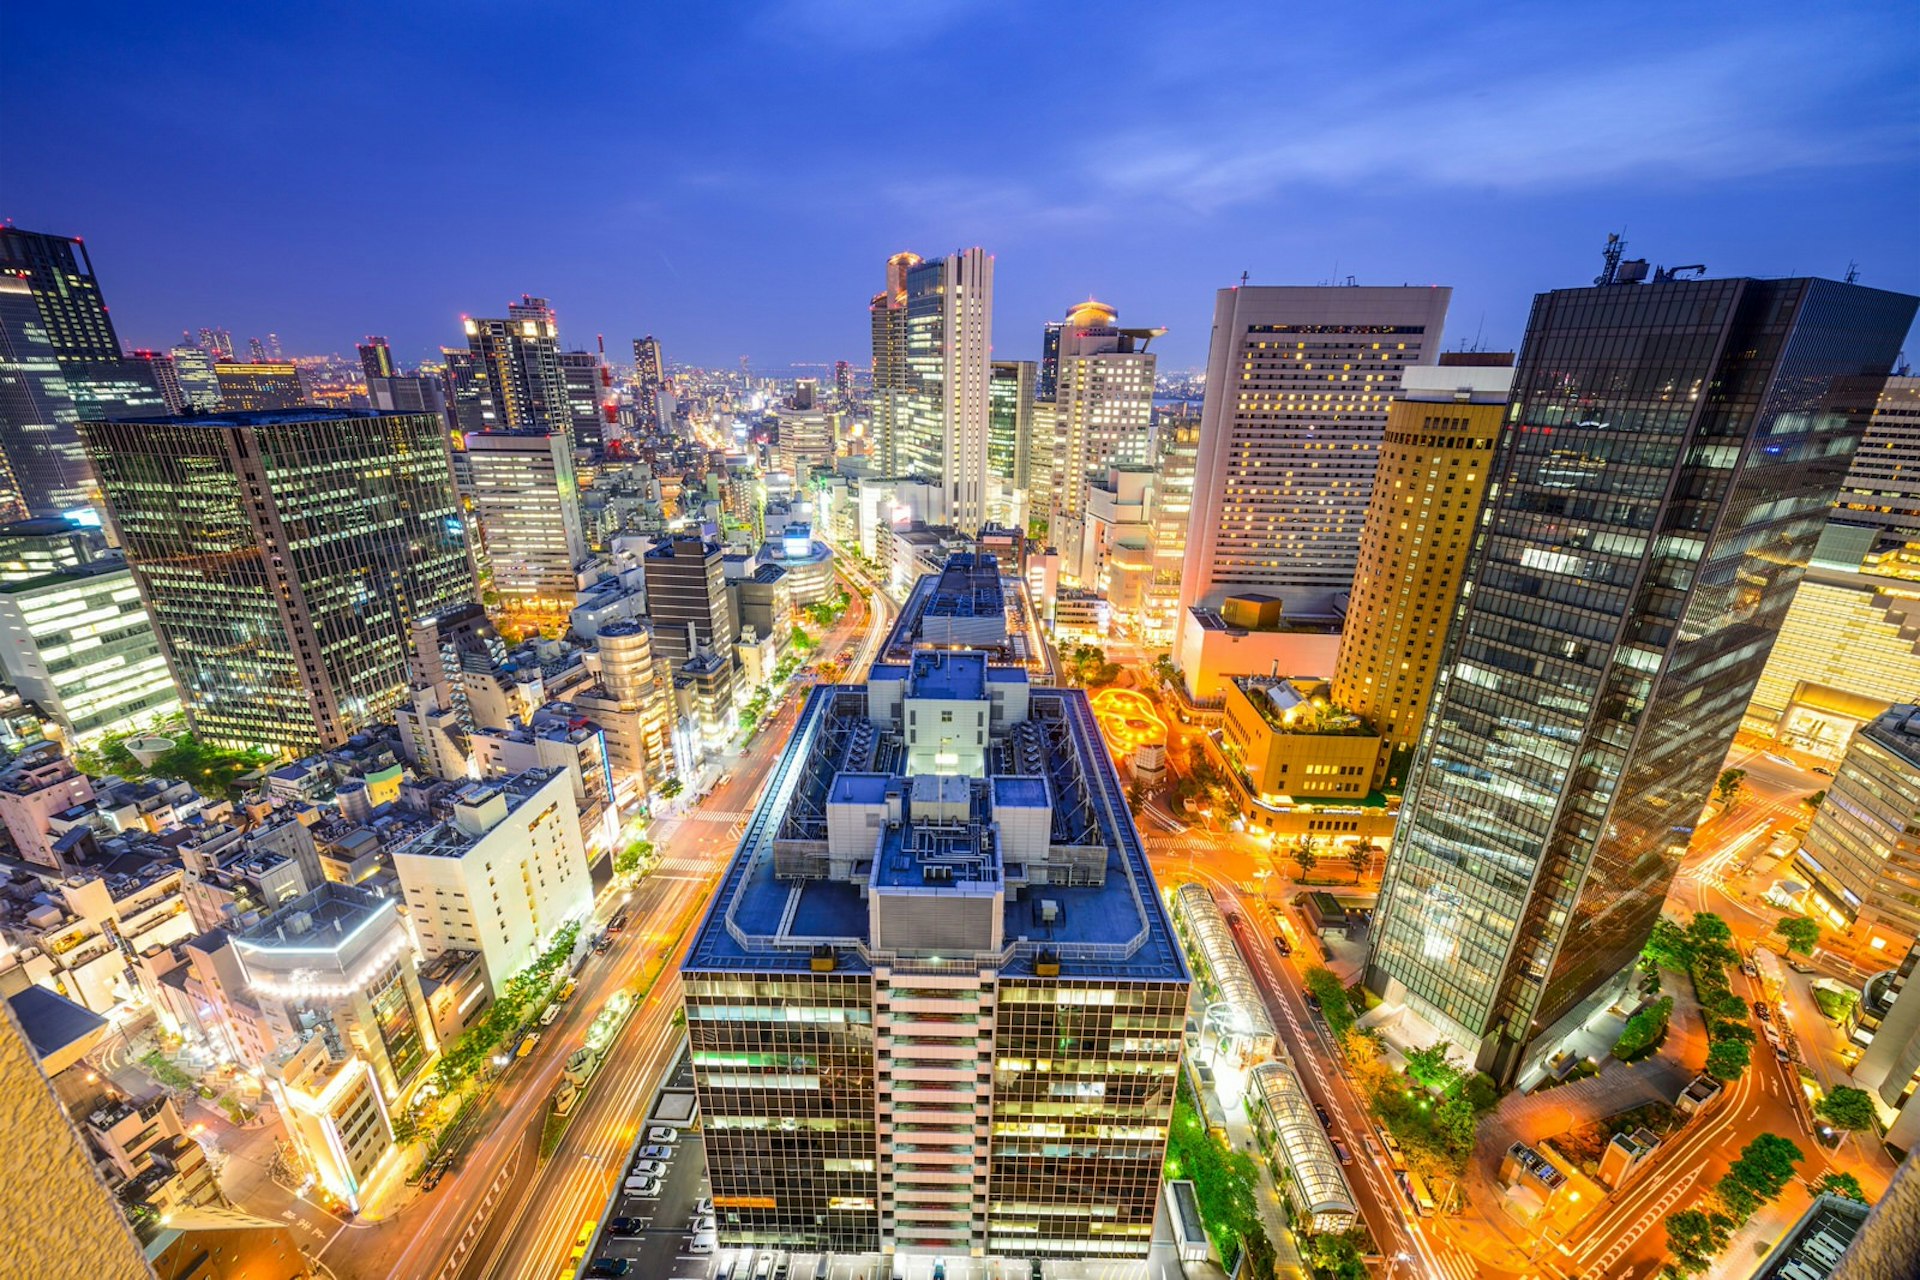 Seen from above Osaka's Umeda District, the city is a maze of bright lights beneath the dark sky 